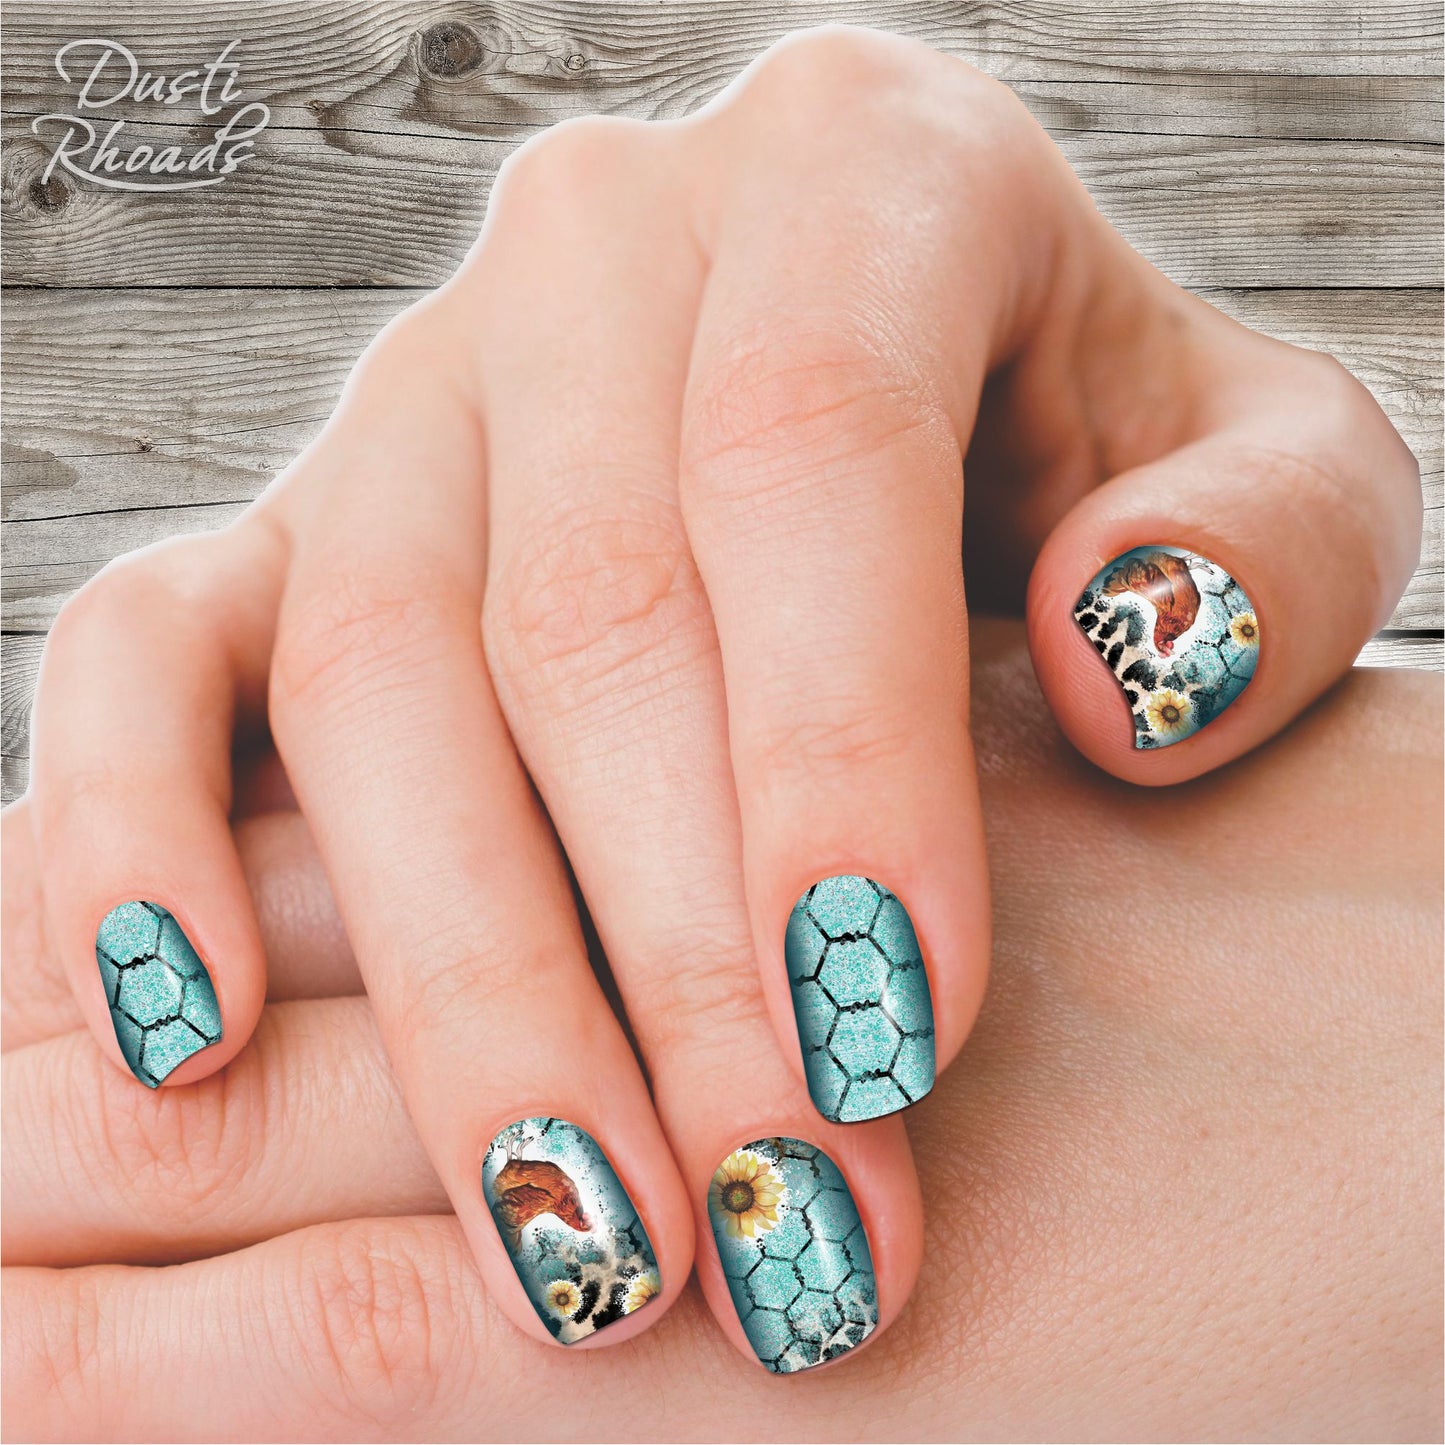 Chicken Fingers Nail Polish Strips